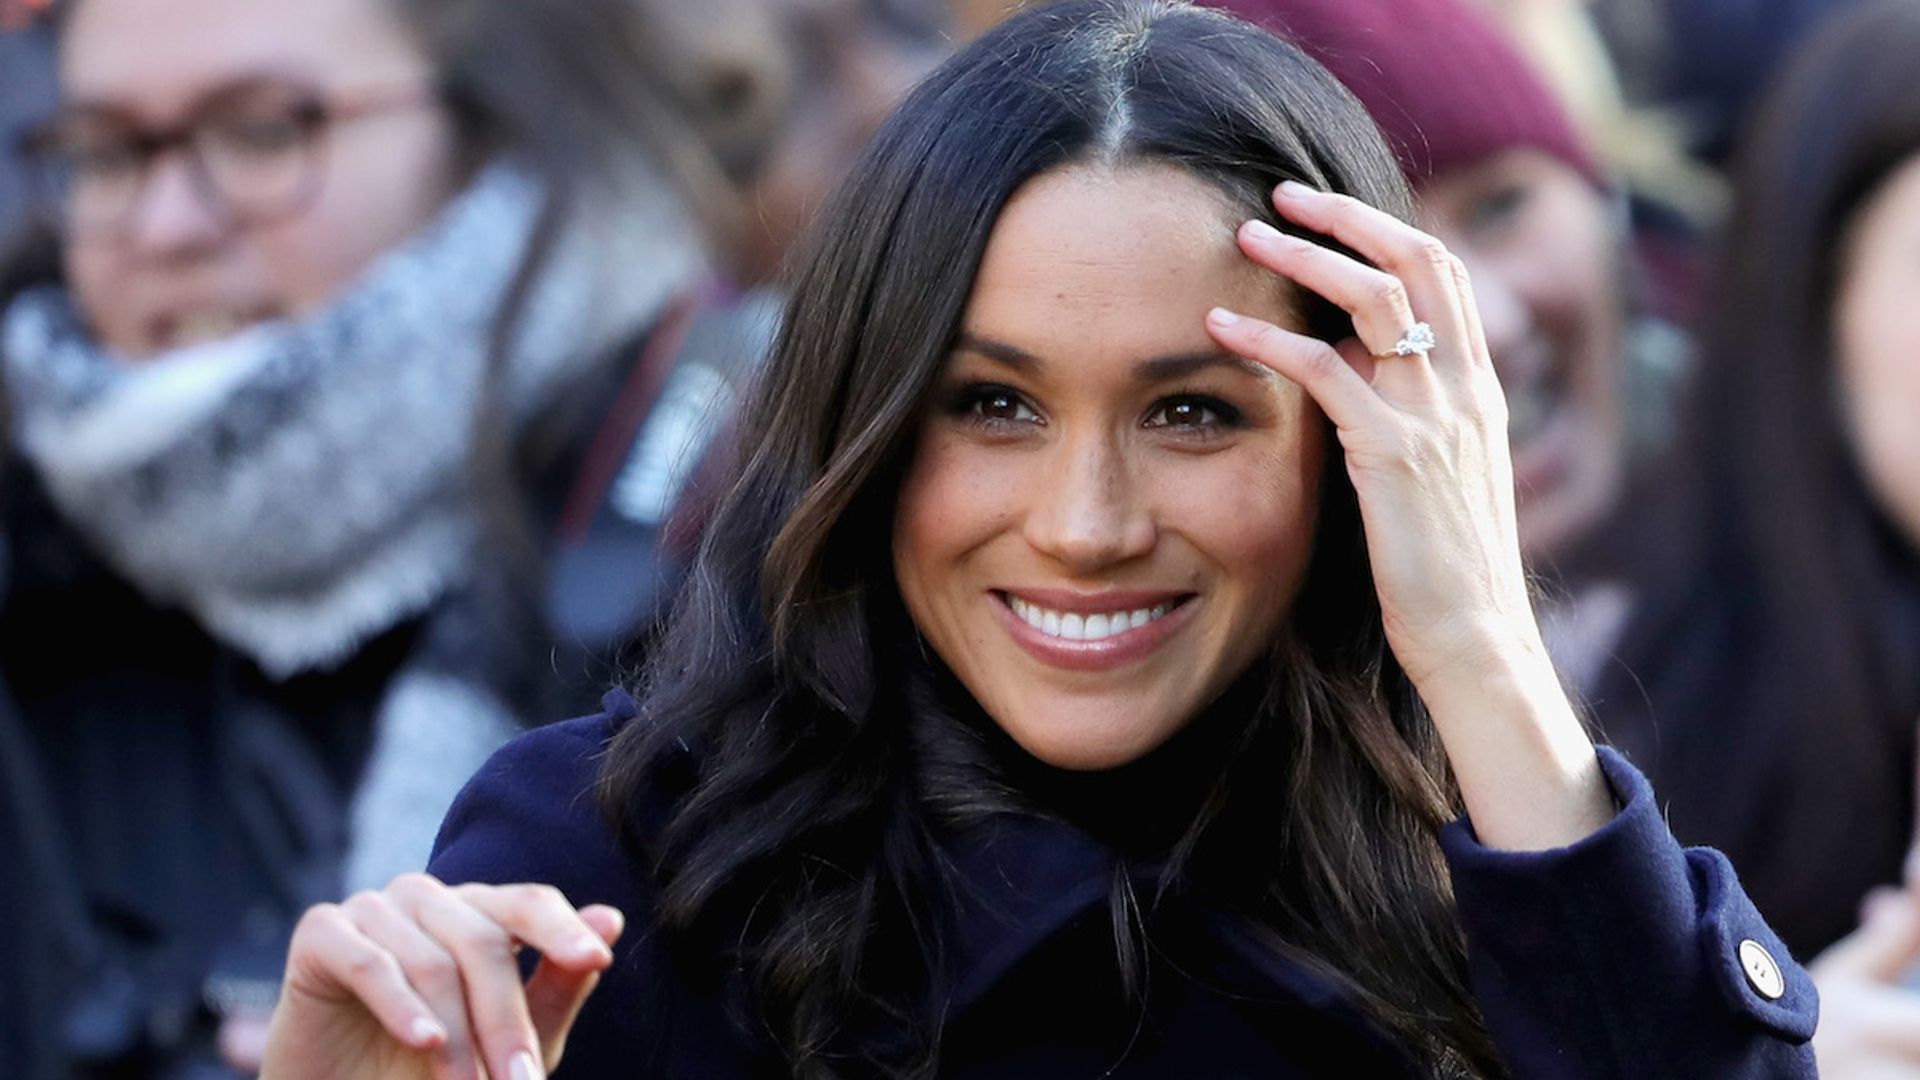 Meghan Markle's mystery new ring sparks fan speculation